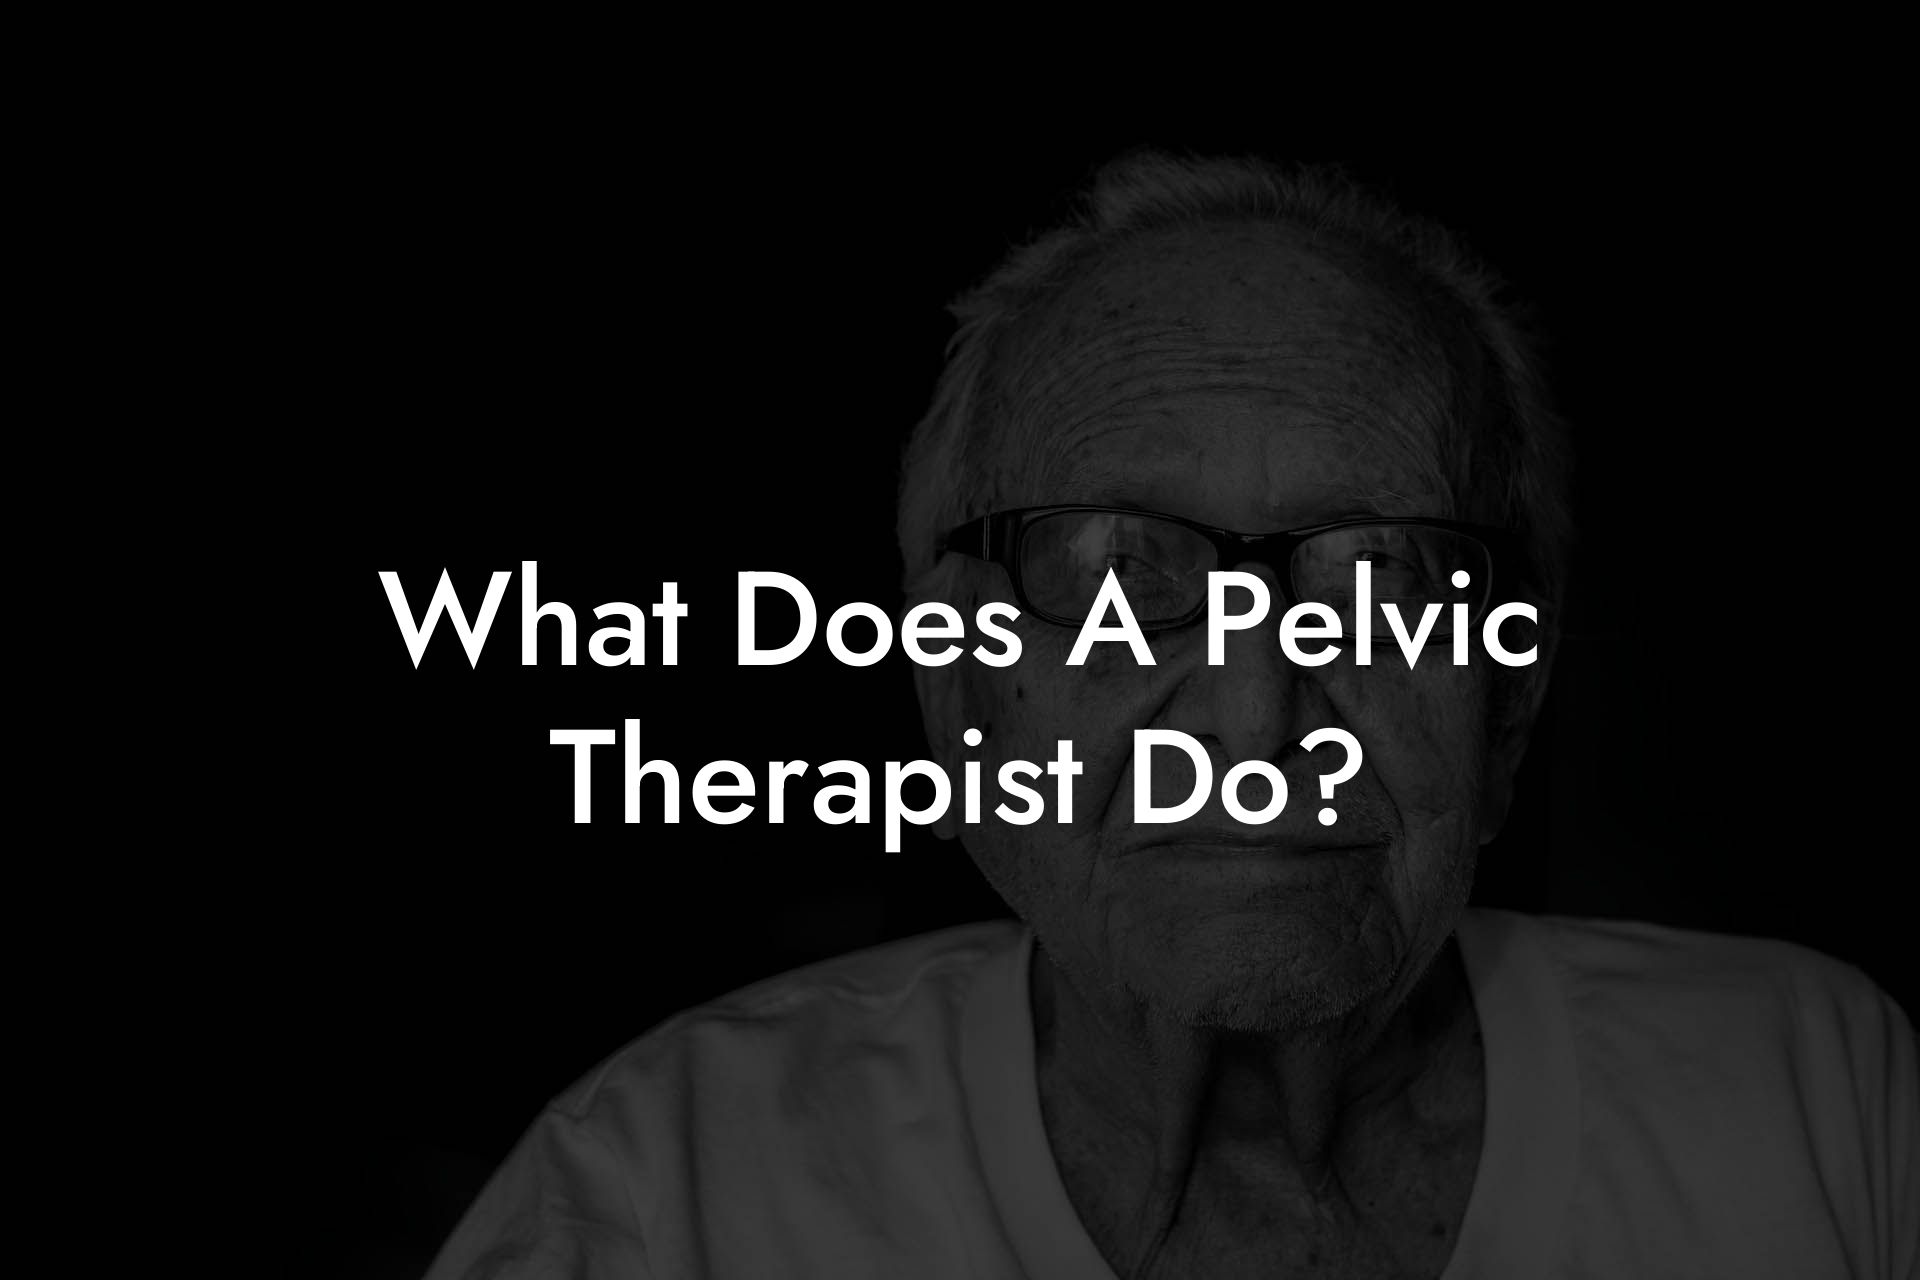 What Does A Pelvic Therapist Do?